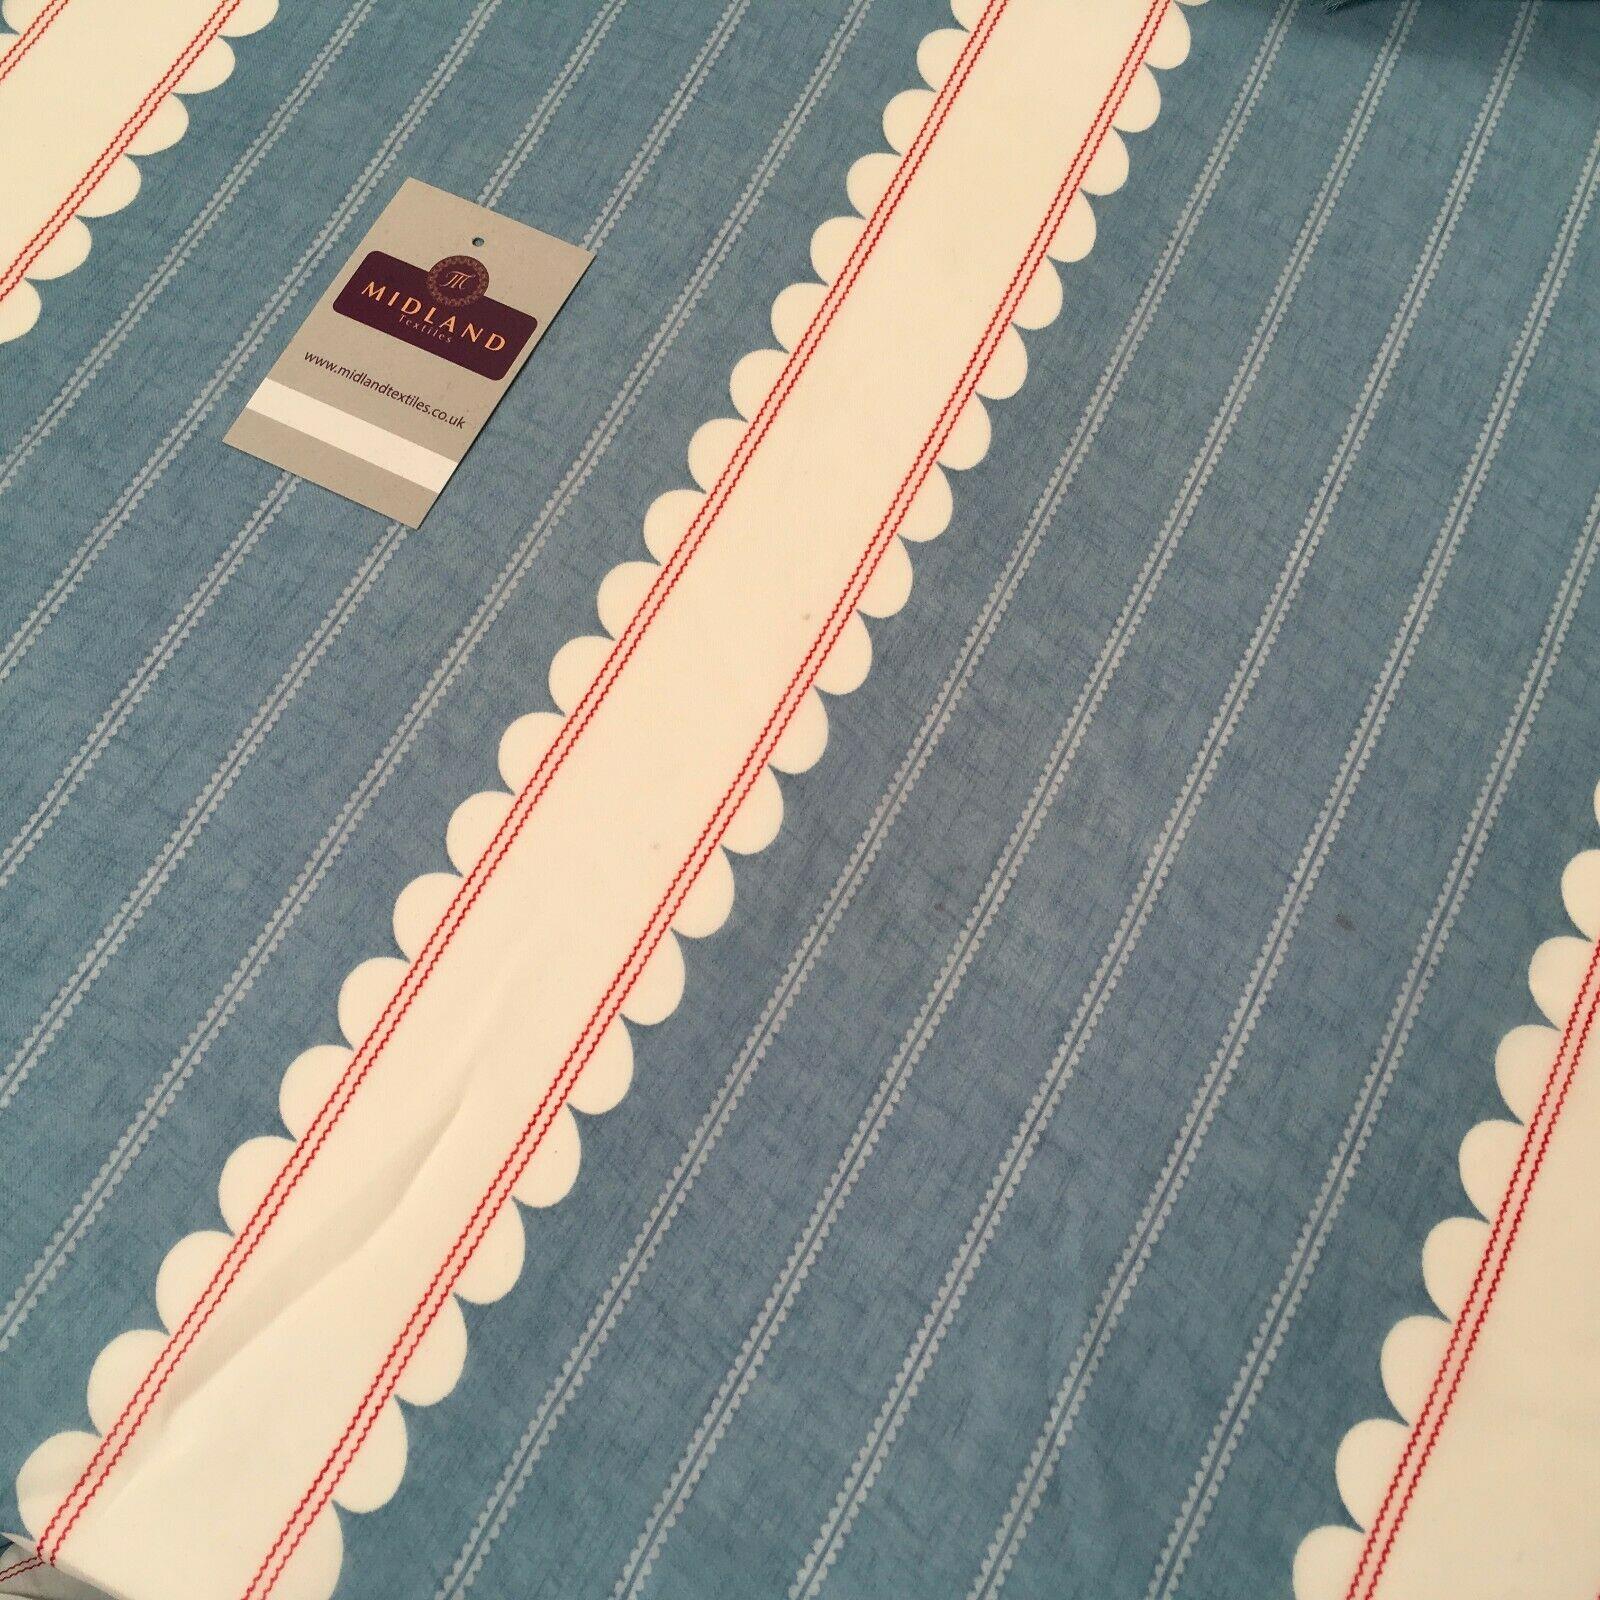 Blue and White Georgette crepe Linen effect dress Fabric 150cm wide MK1095-21